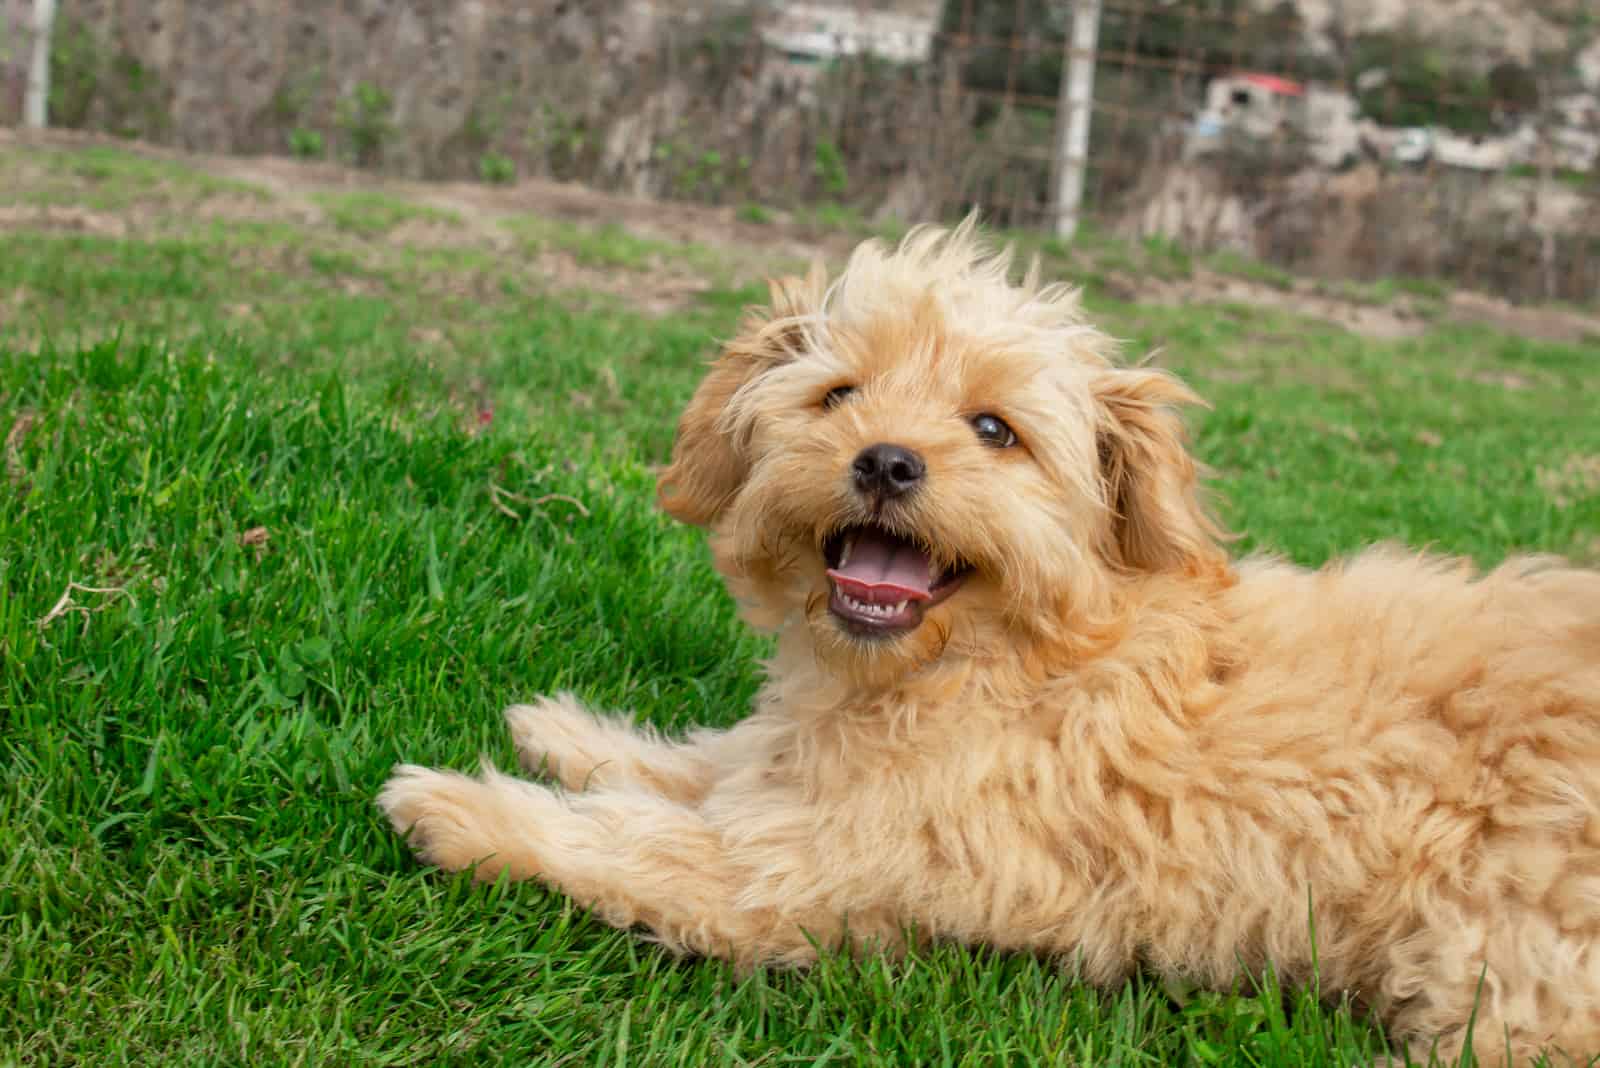 Mini Goldendoodle puppy on a green lawn